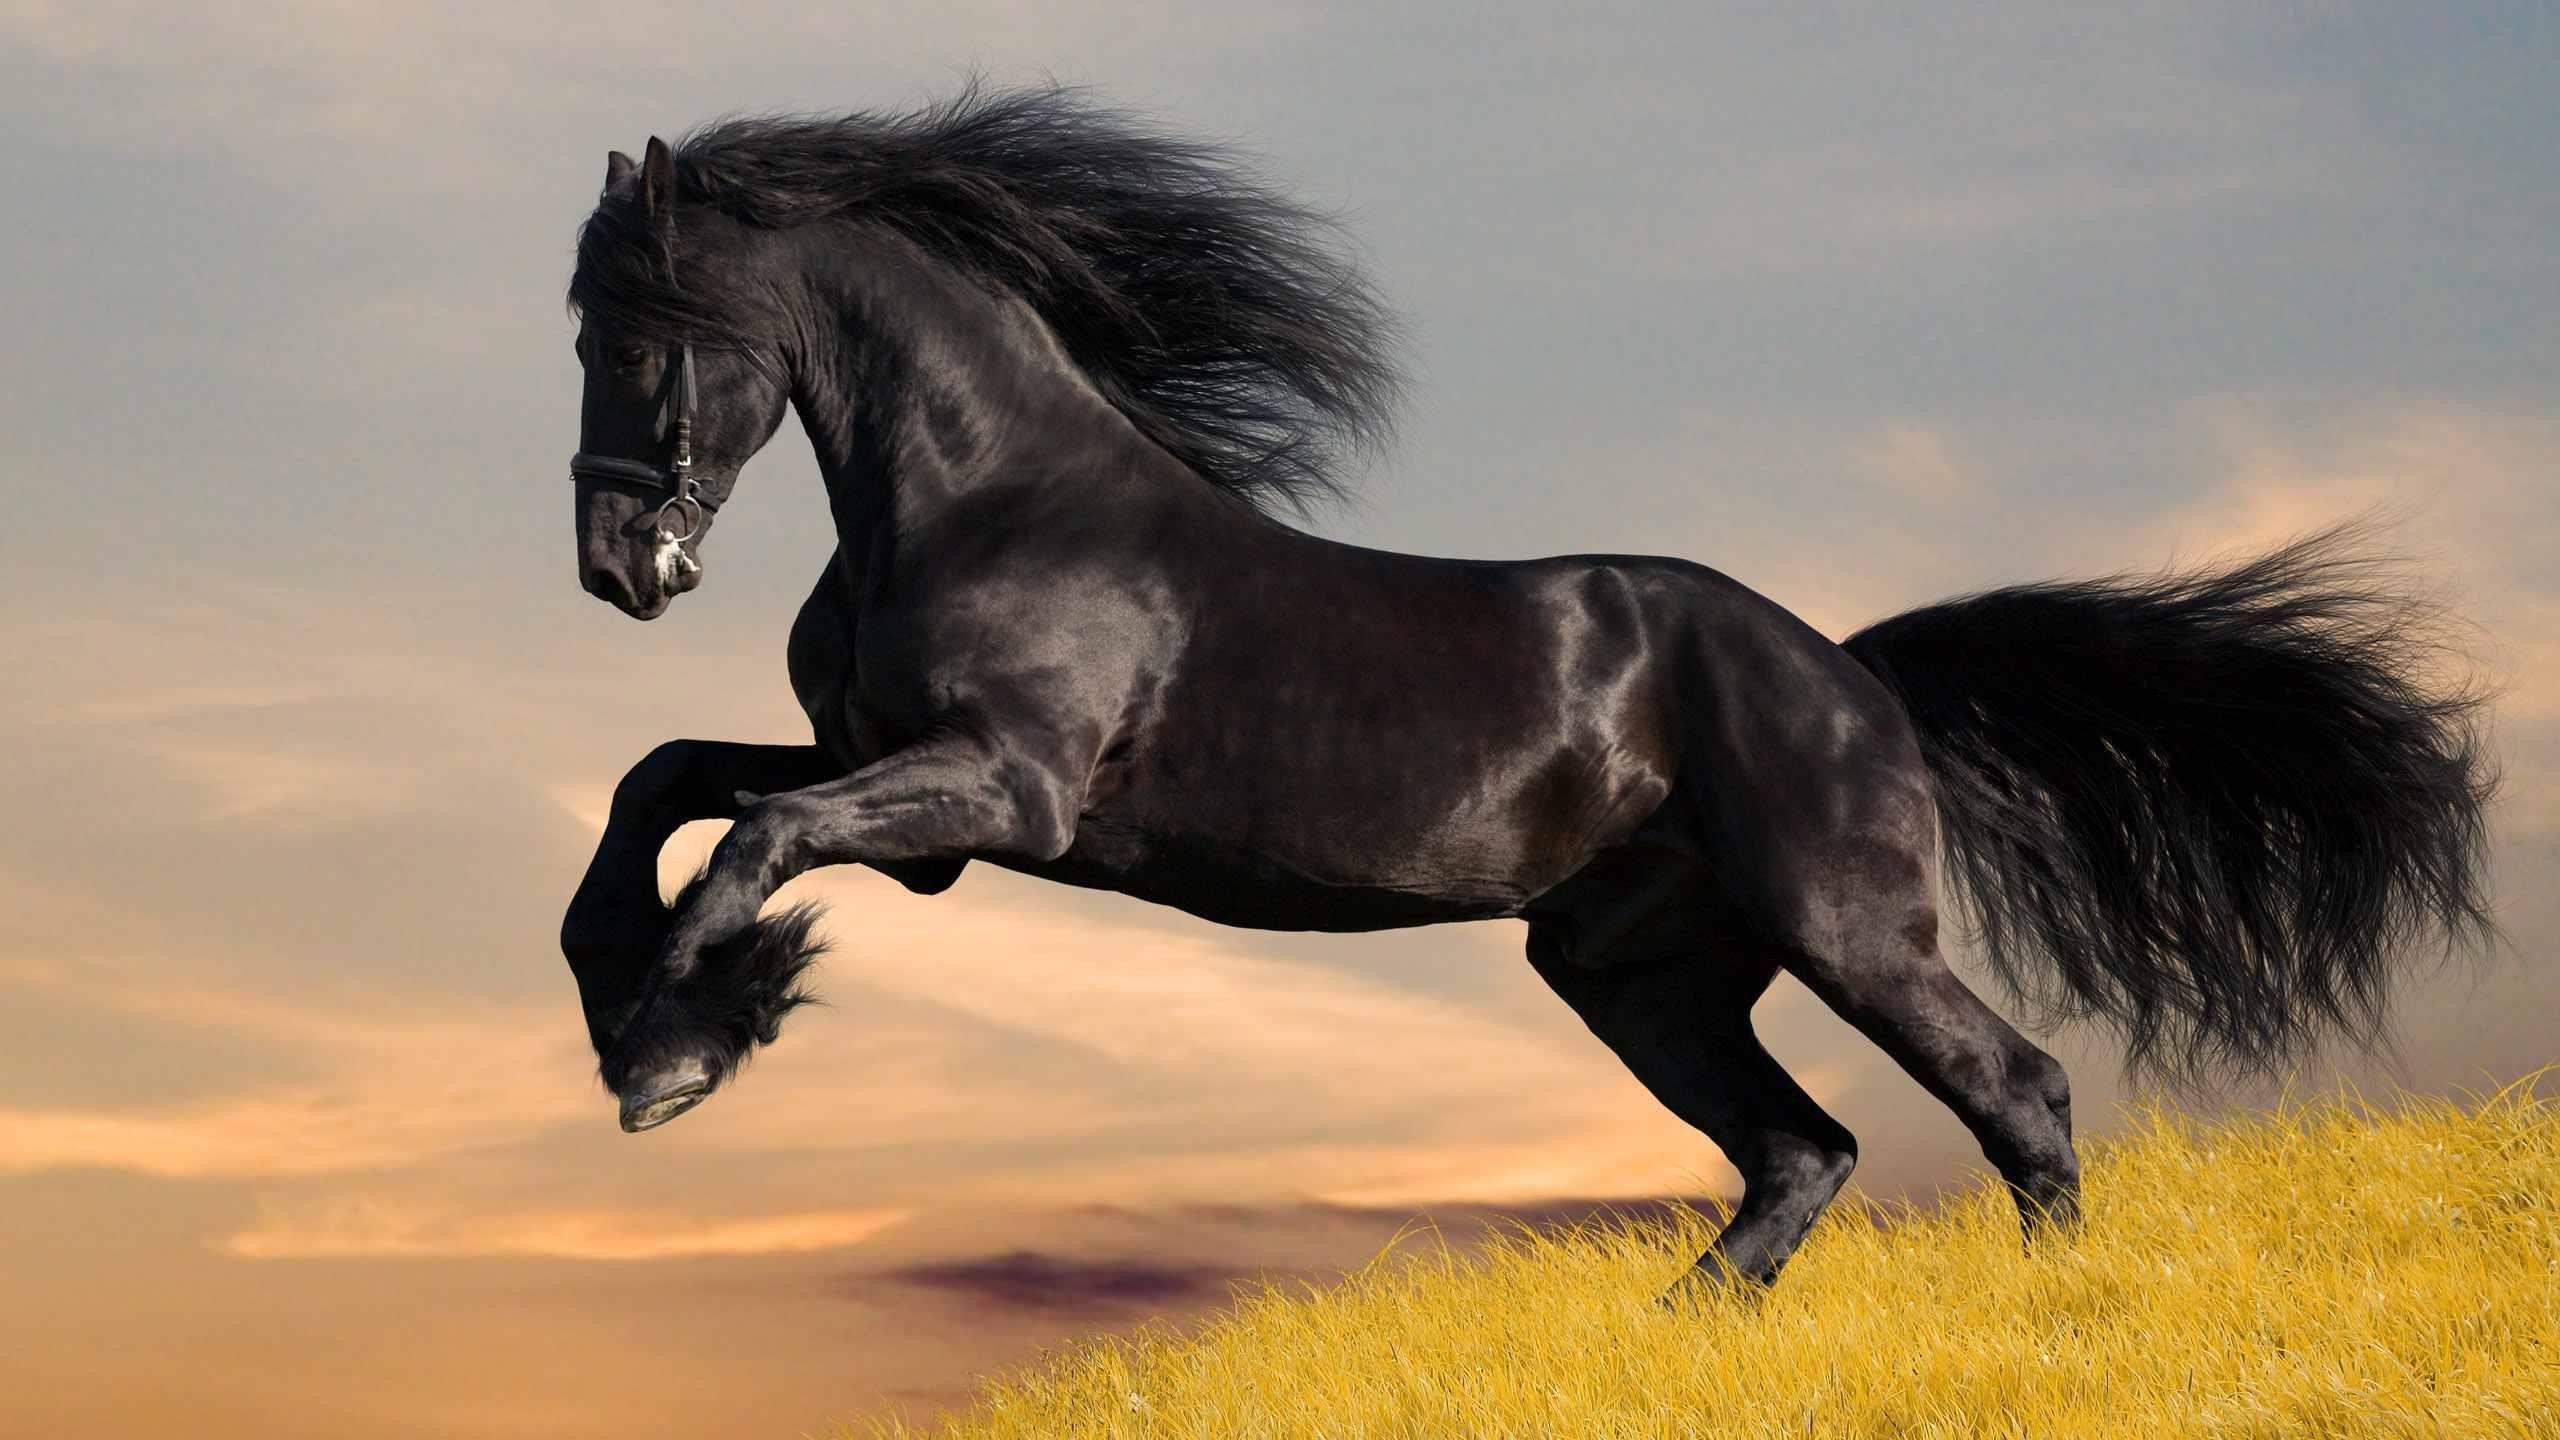 running horse wallpaper high resolution energy download picture